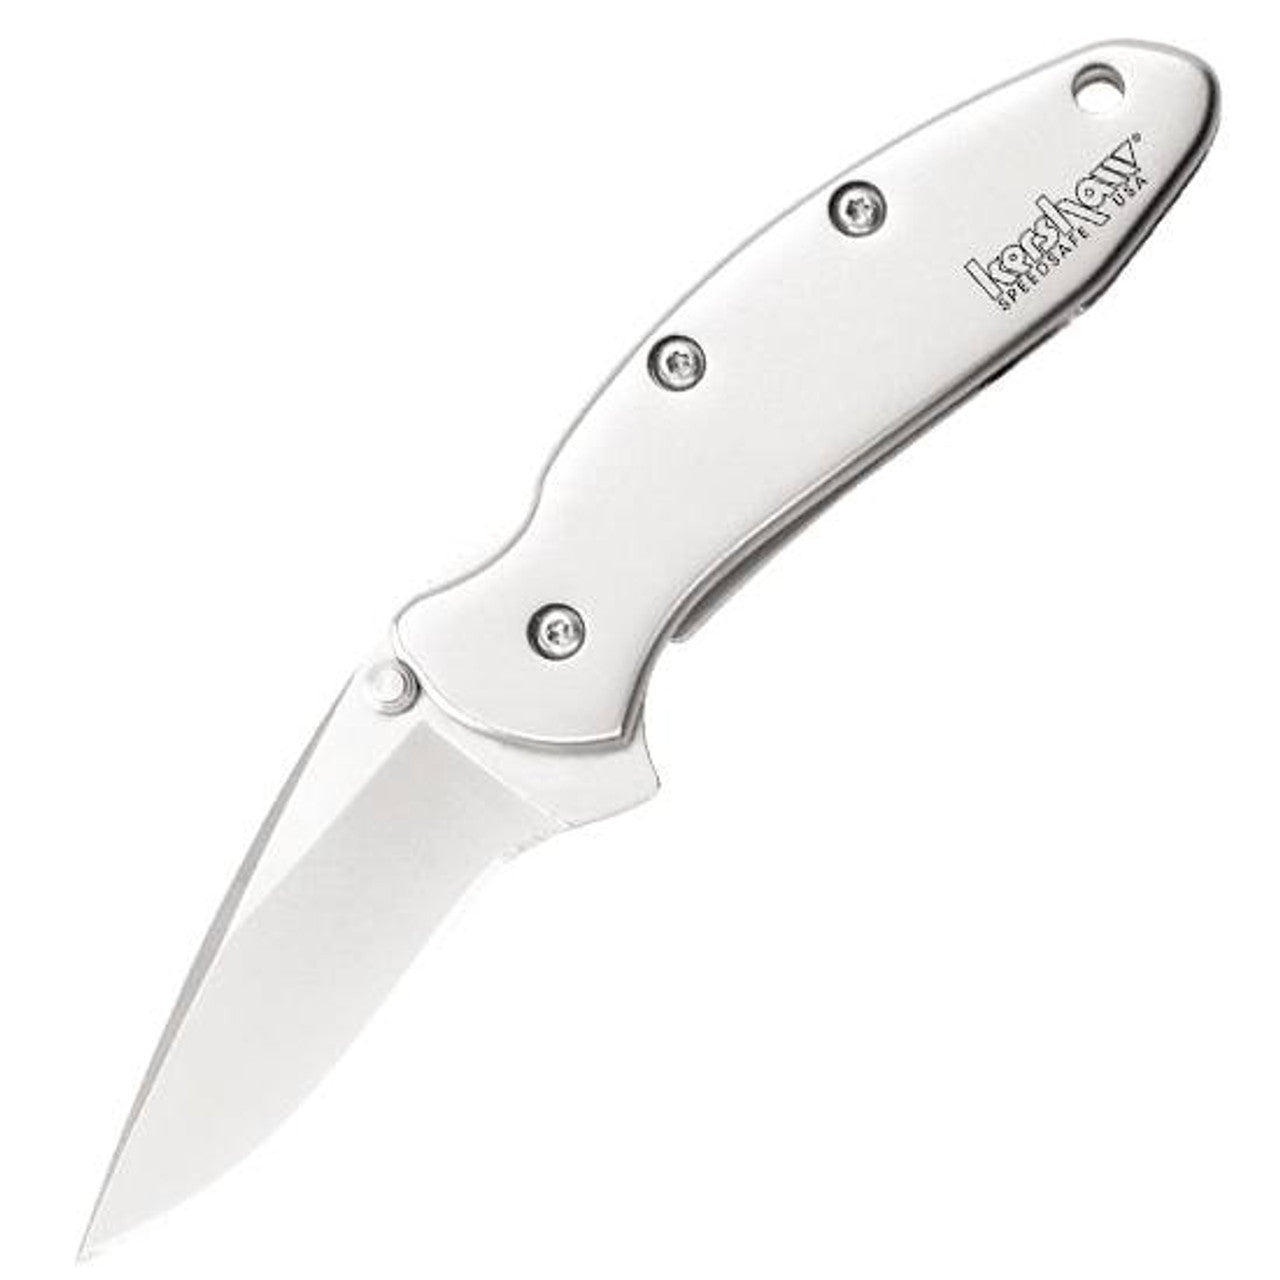 Kershaw Chive Assisted Opening Folding Knife, Blade, Stainless, Silver, 1.9"